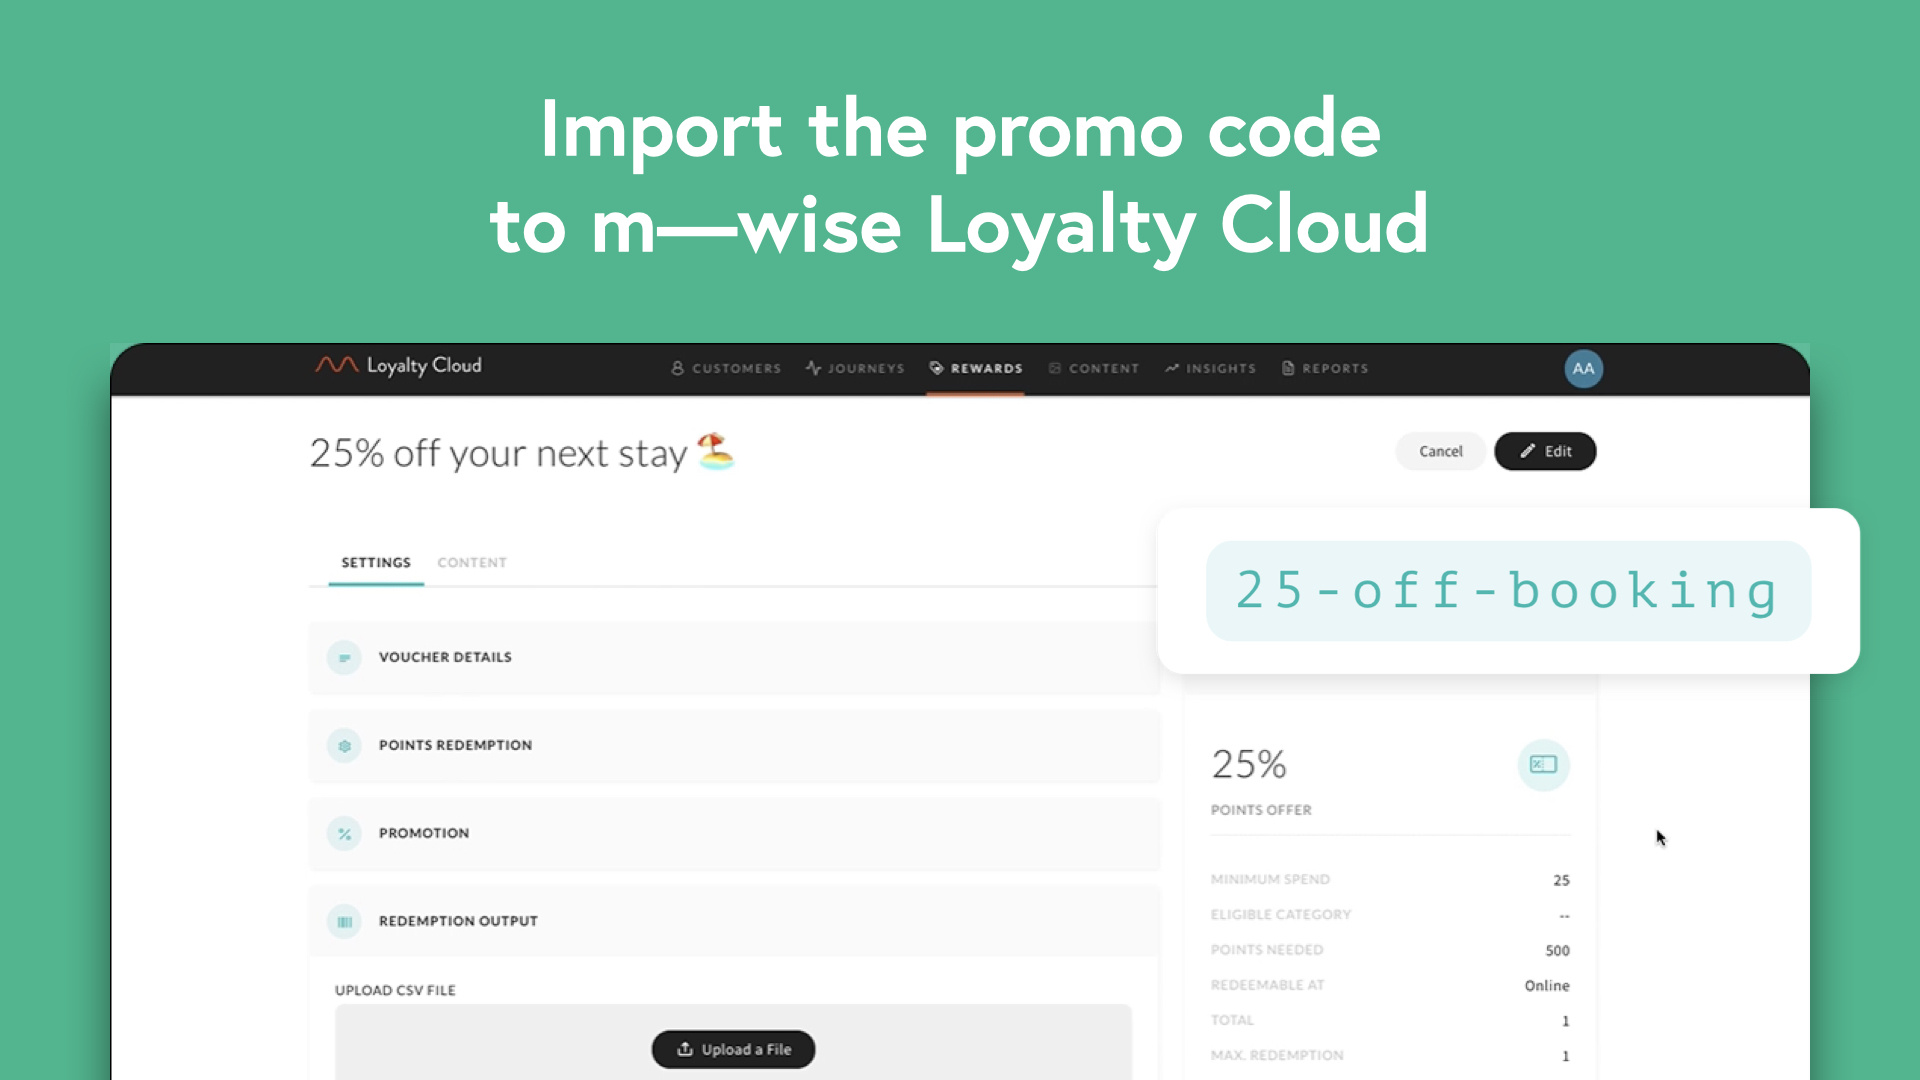 Importing a promo code on m—wise Loyalty Cloud